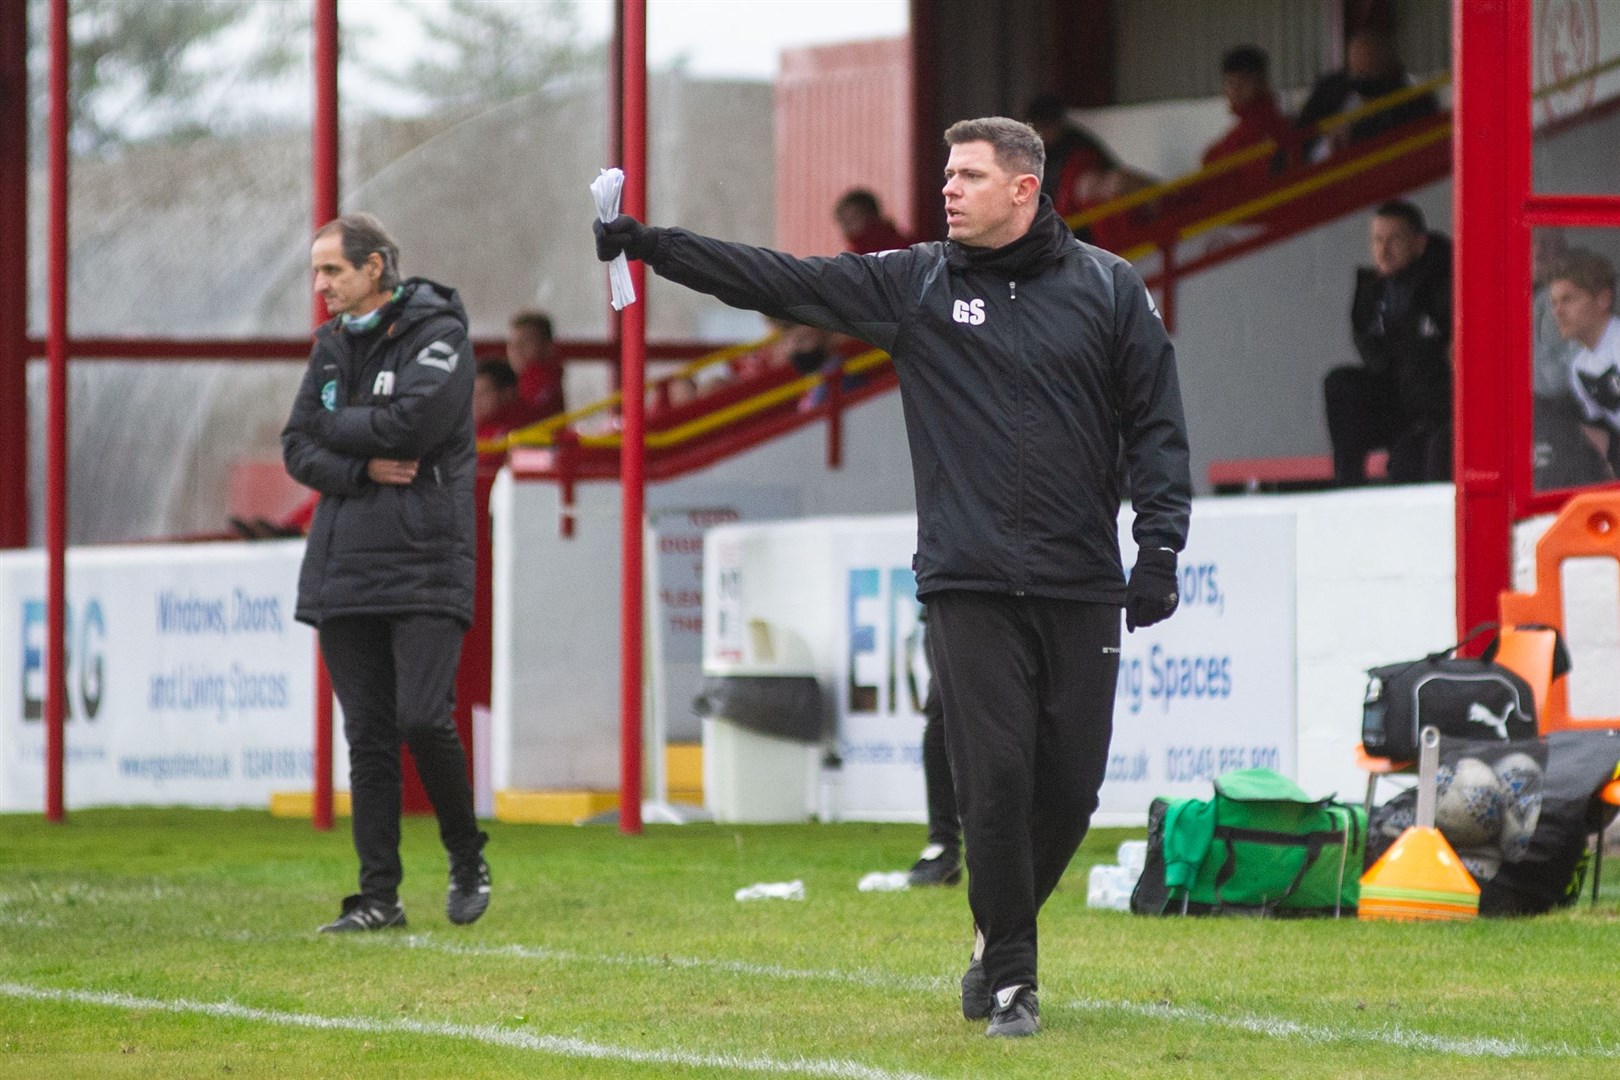 Buckie Thistle manager Graeme Stewart was delighted with the performance.